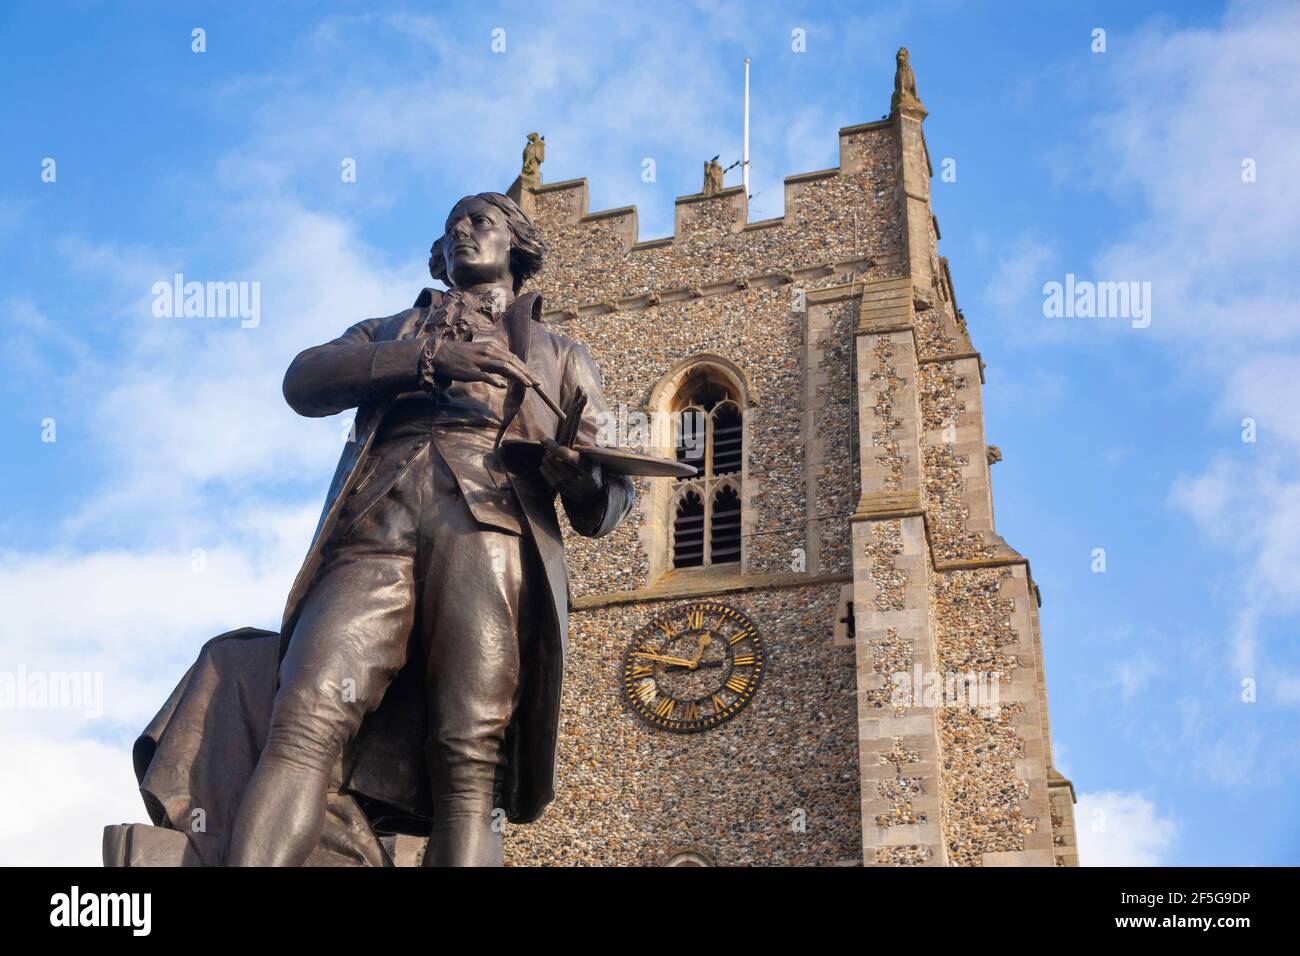 A statue of artist painter Thomas Gainsborough with brush and palette stands in the market-place, in front of St Peter's Church, Sudbury, Suffolk. Stock Photo